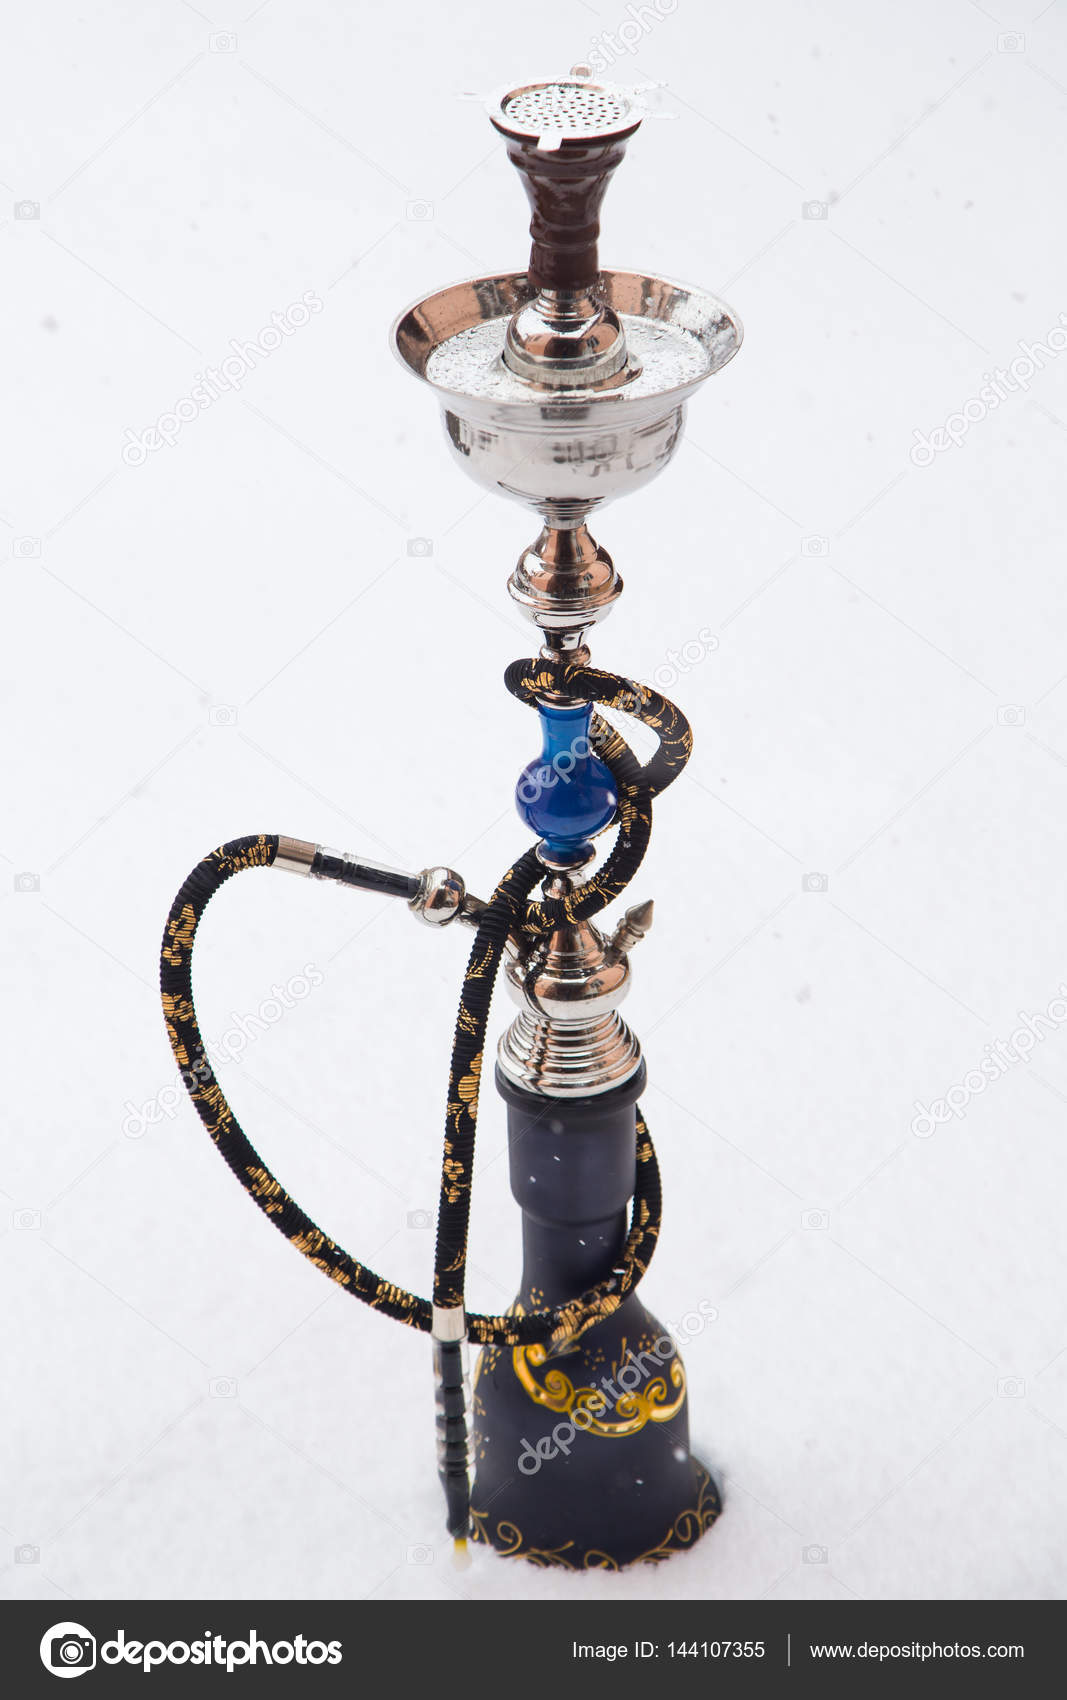 Big hookah for tobacco made of metal, glass and ceramics. Snowing